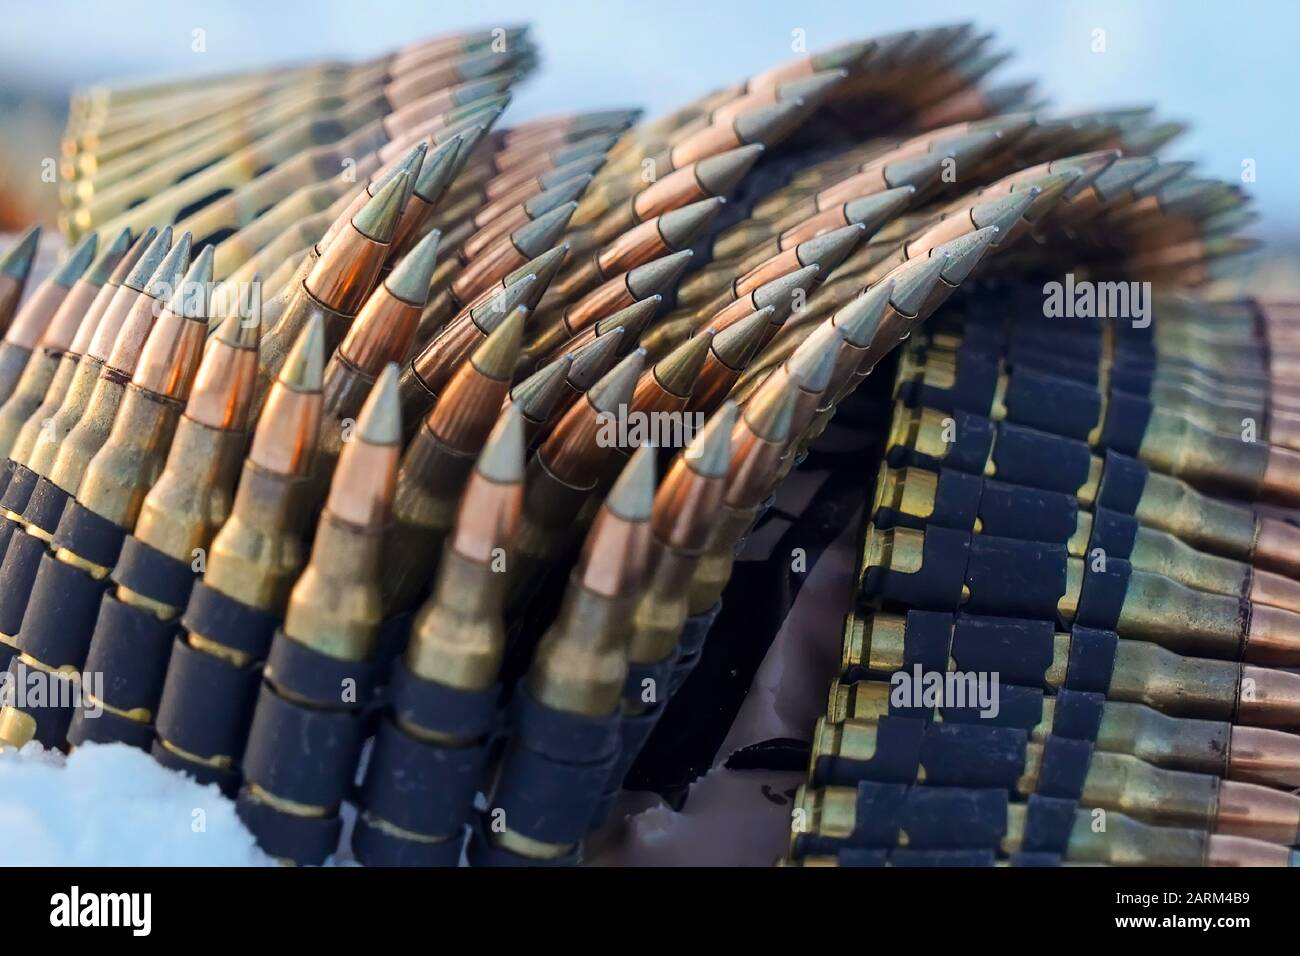 Belts of 7.62mm ammunition. Ammunition- - informally ammo - is the material fired, scattered, dropped or detonated from any weapon. Ammunition is both expendable weapons (e.g., bombs, missiles, grenades, land mines) and the component parts of other weapons that create the effect on a target (e.g., bullets and warheads).[1] Nearly all mechanical weapons require some form of ammunition to operate.  The term ammunition can be traced back to the mid-17th century. The word comes from the French la munition, for the material used for war. Stock Photo